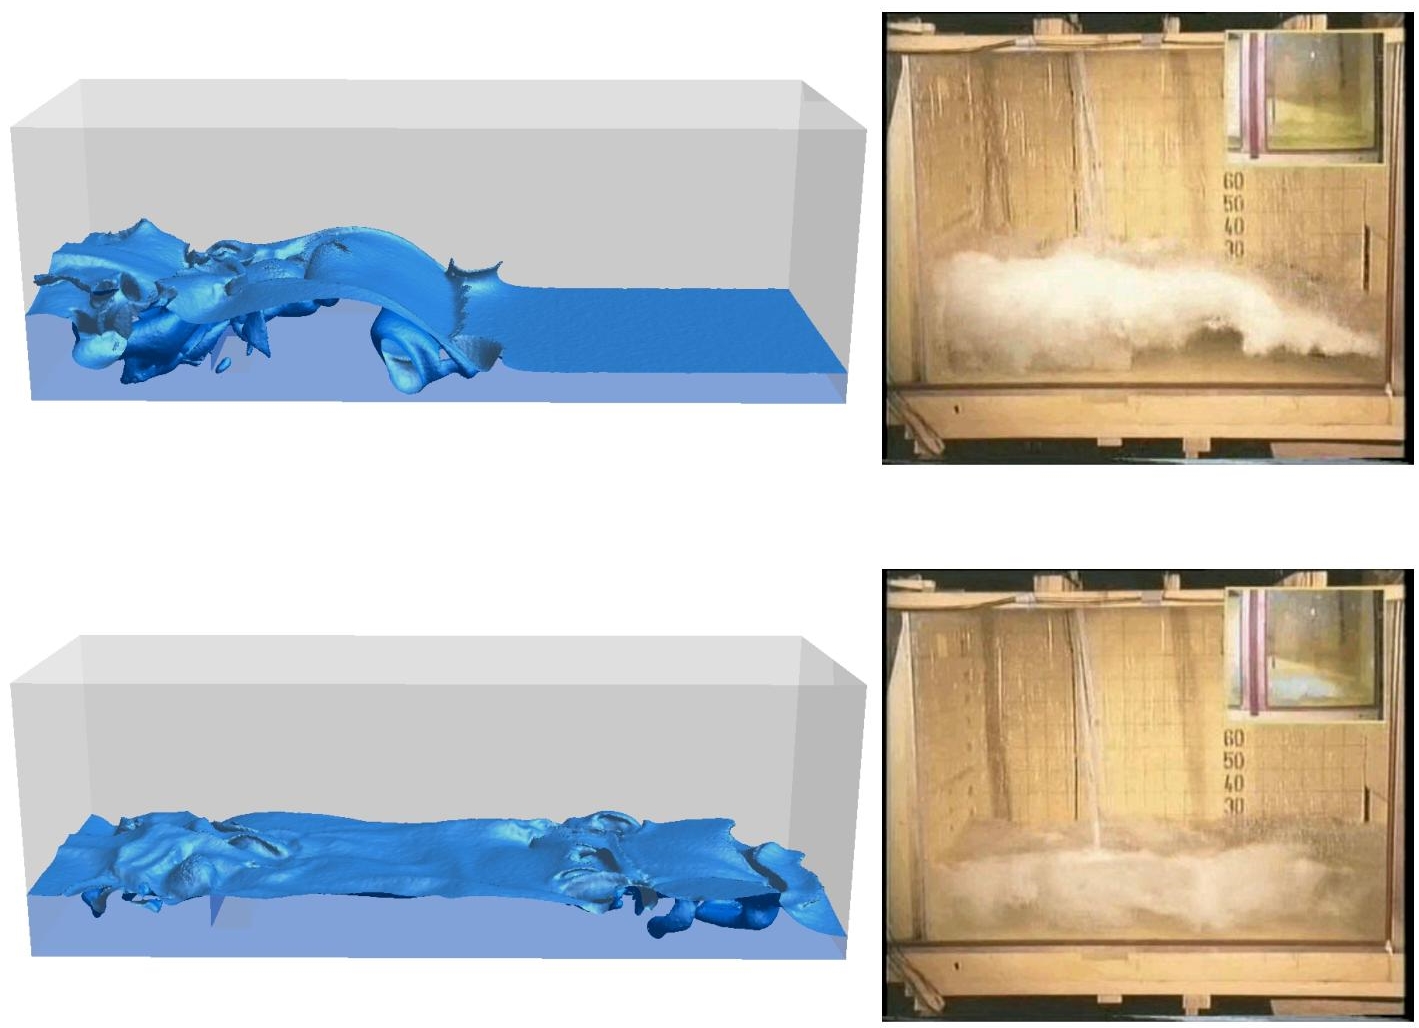 Schematic illustration of 3D falling water column on a obstacle. It depicts the comparison between the interface obtained in the simulation (left) and the pictures from the MARIN experiment (right).